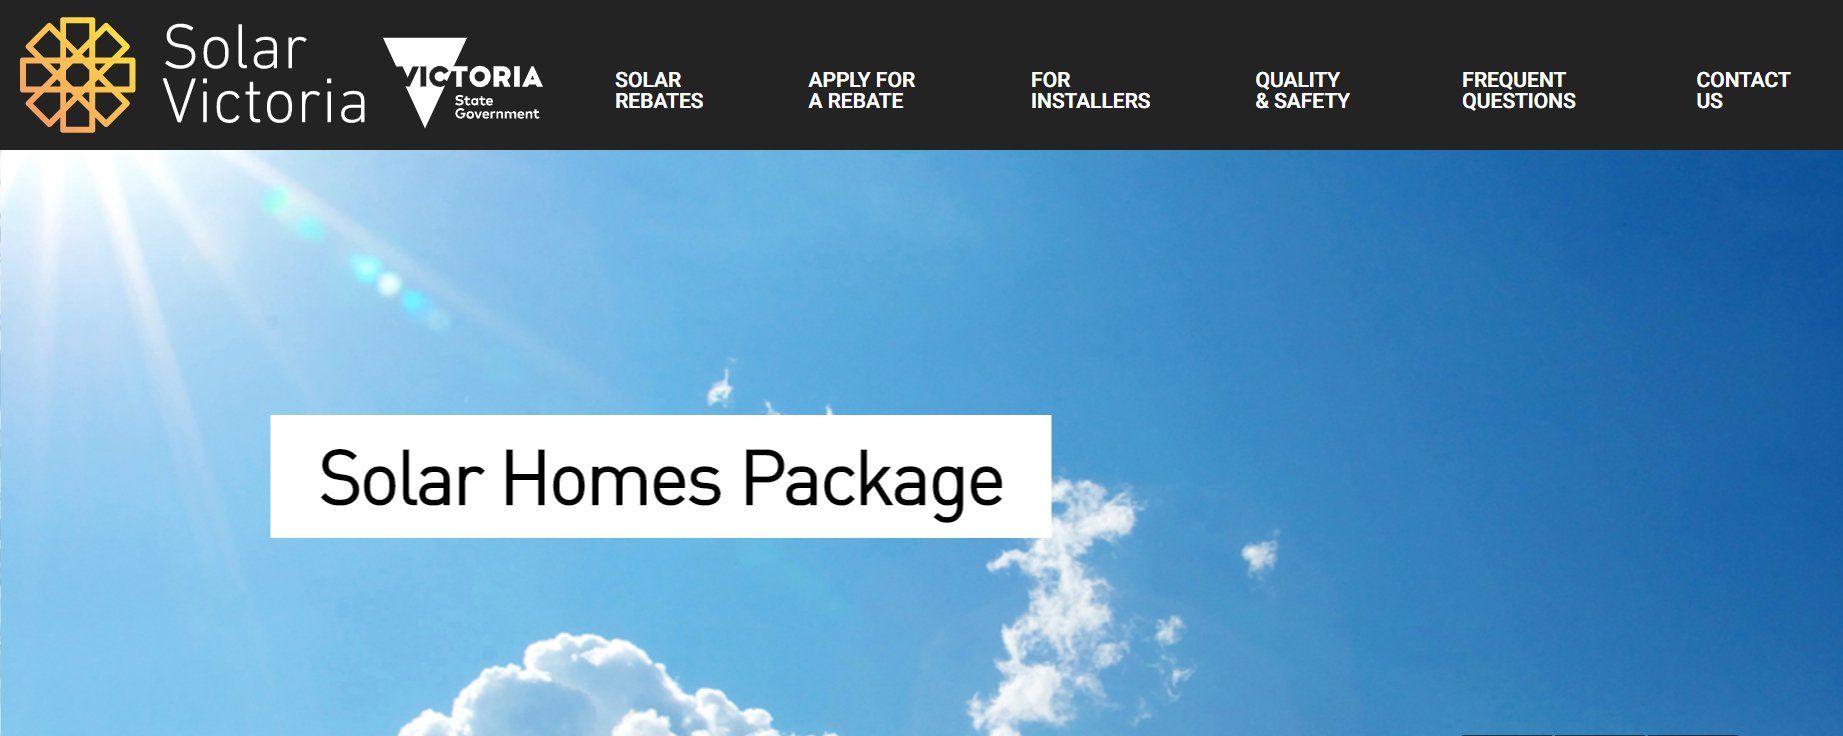 Solar home package